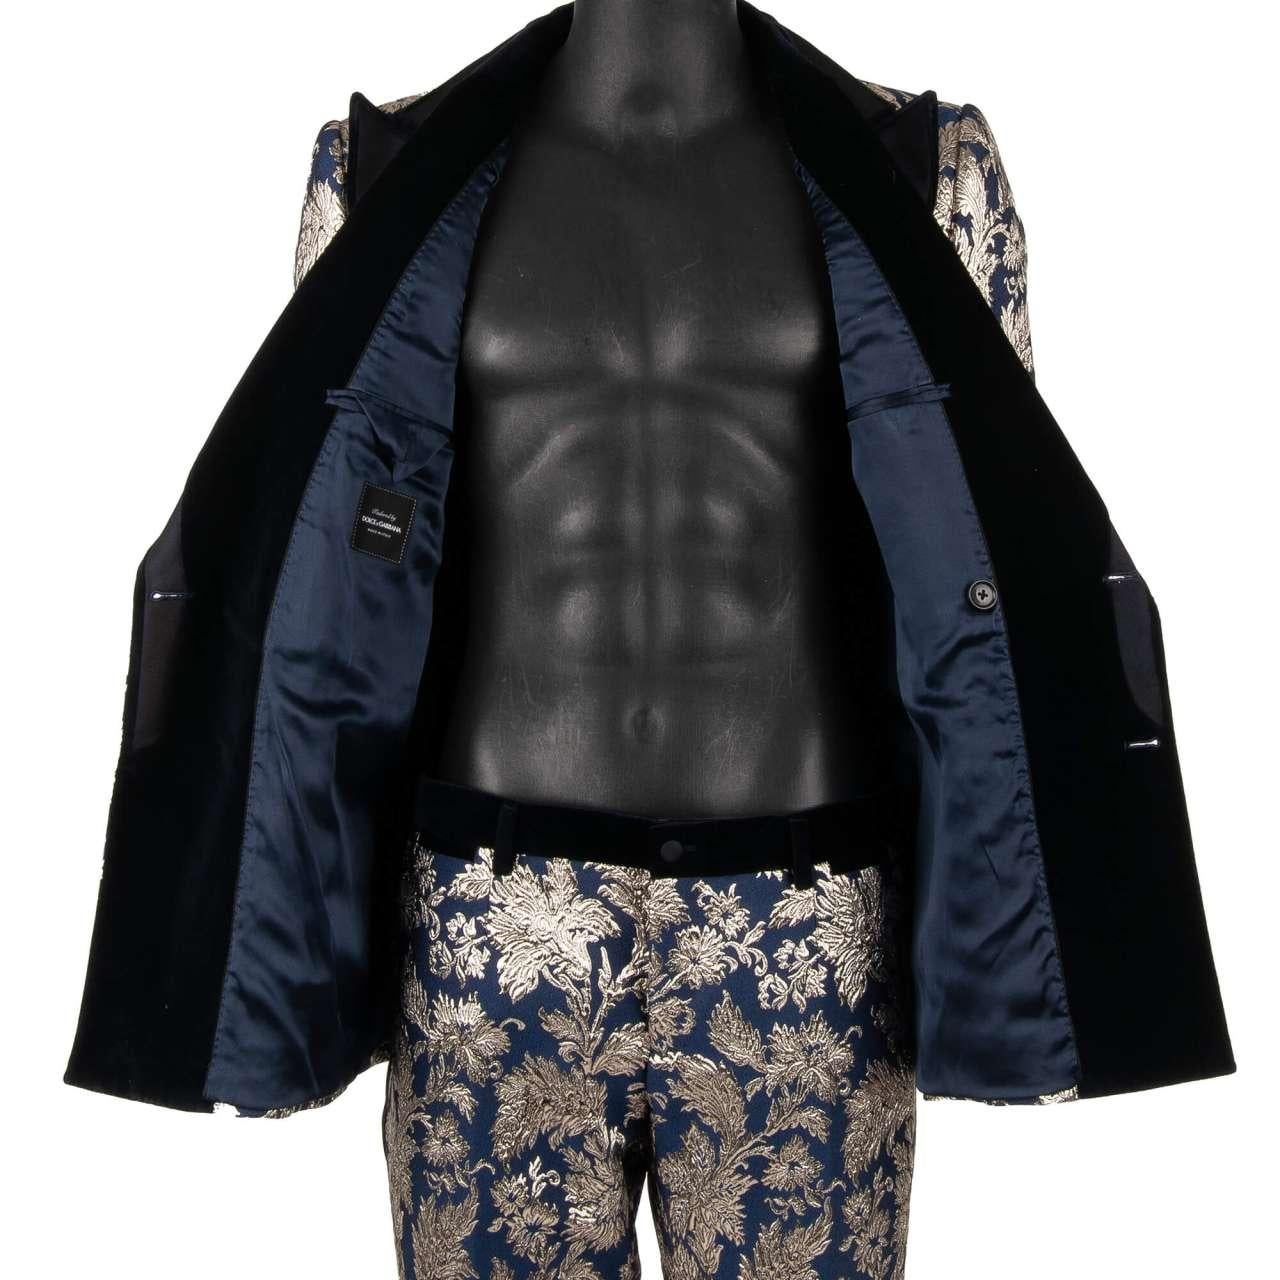 Dolce & Gabbana - Flower Jacquard Double breasted Suit Silver Blue 48 In Excellent Condition For Sale In Erkrath, DE